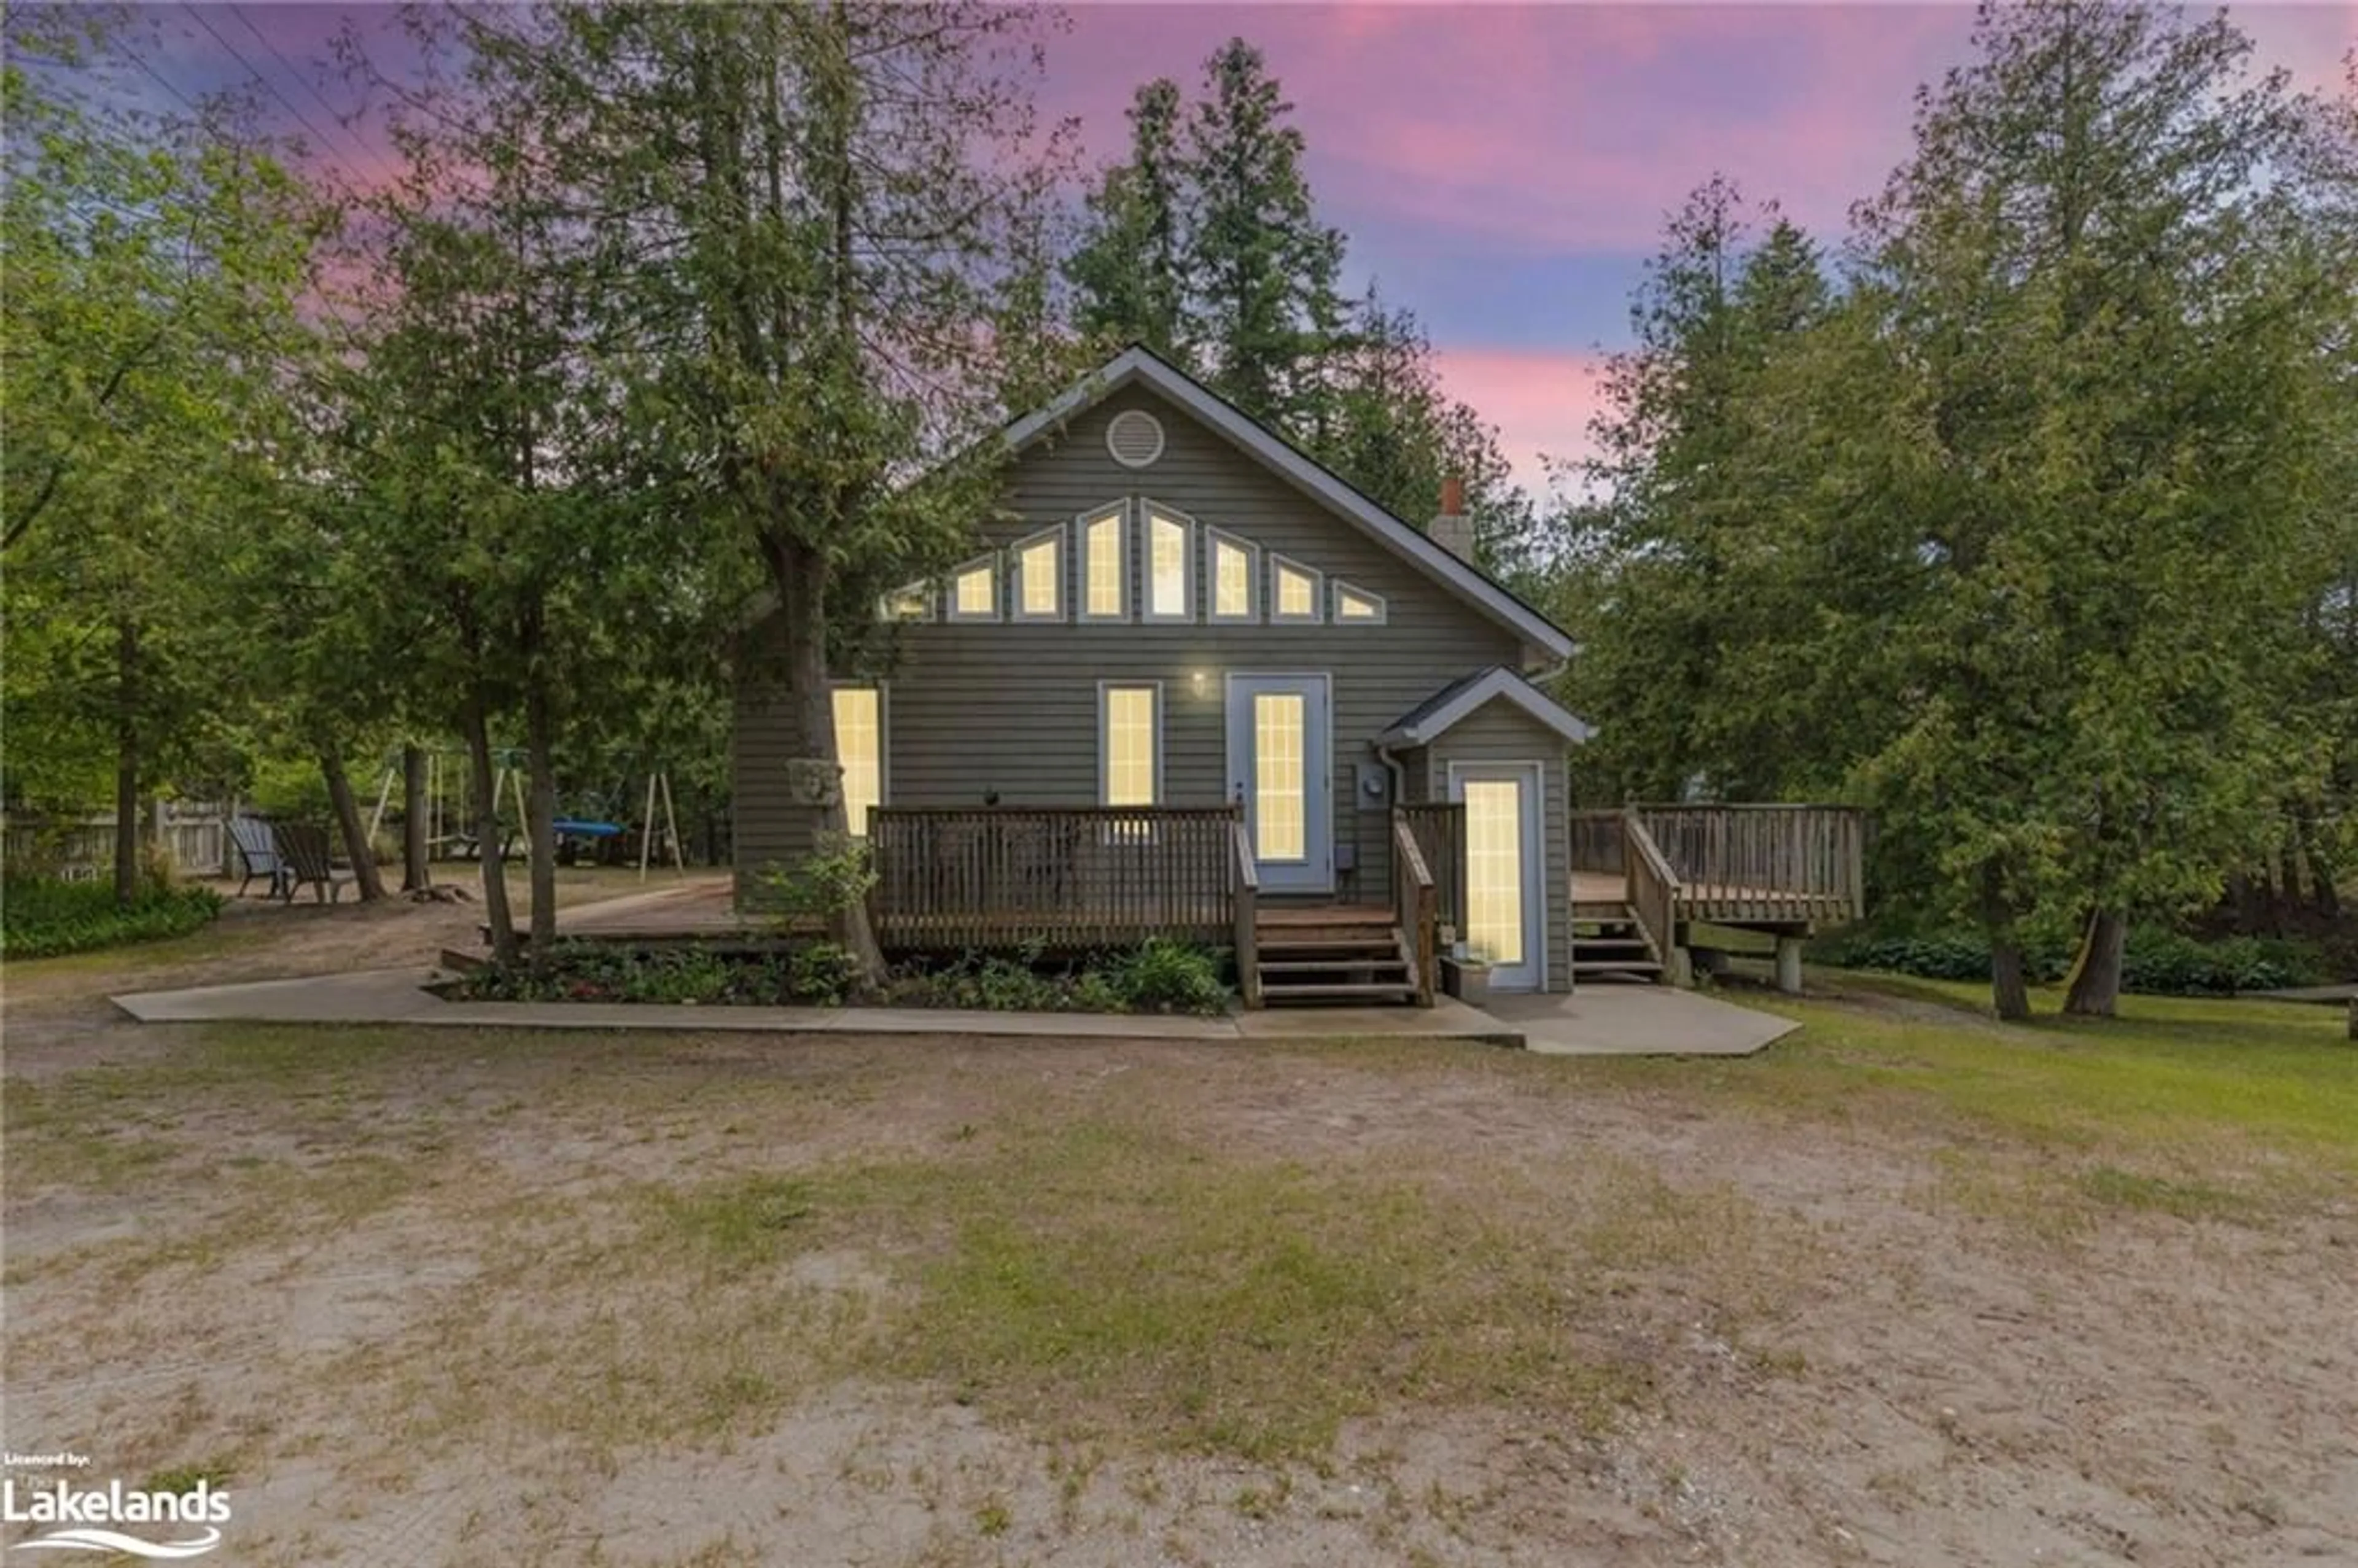 Cottage for 840 River Rd, Wasaga Beach Ontario L9Z 2P3